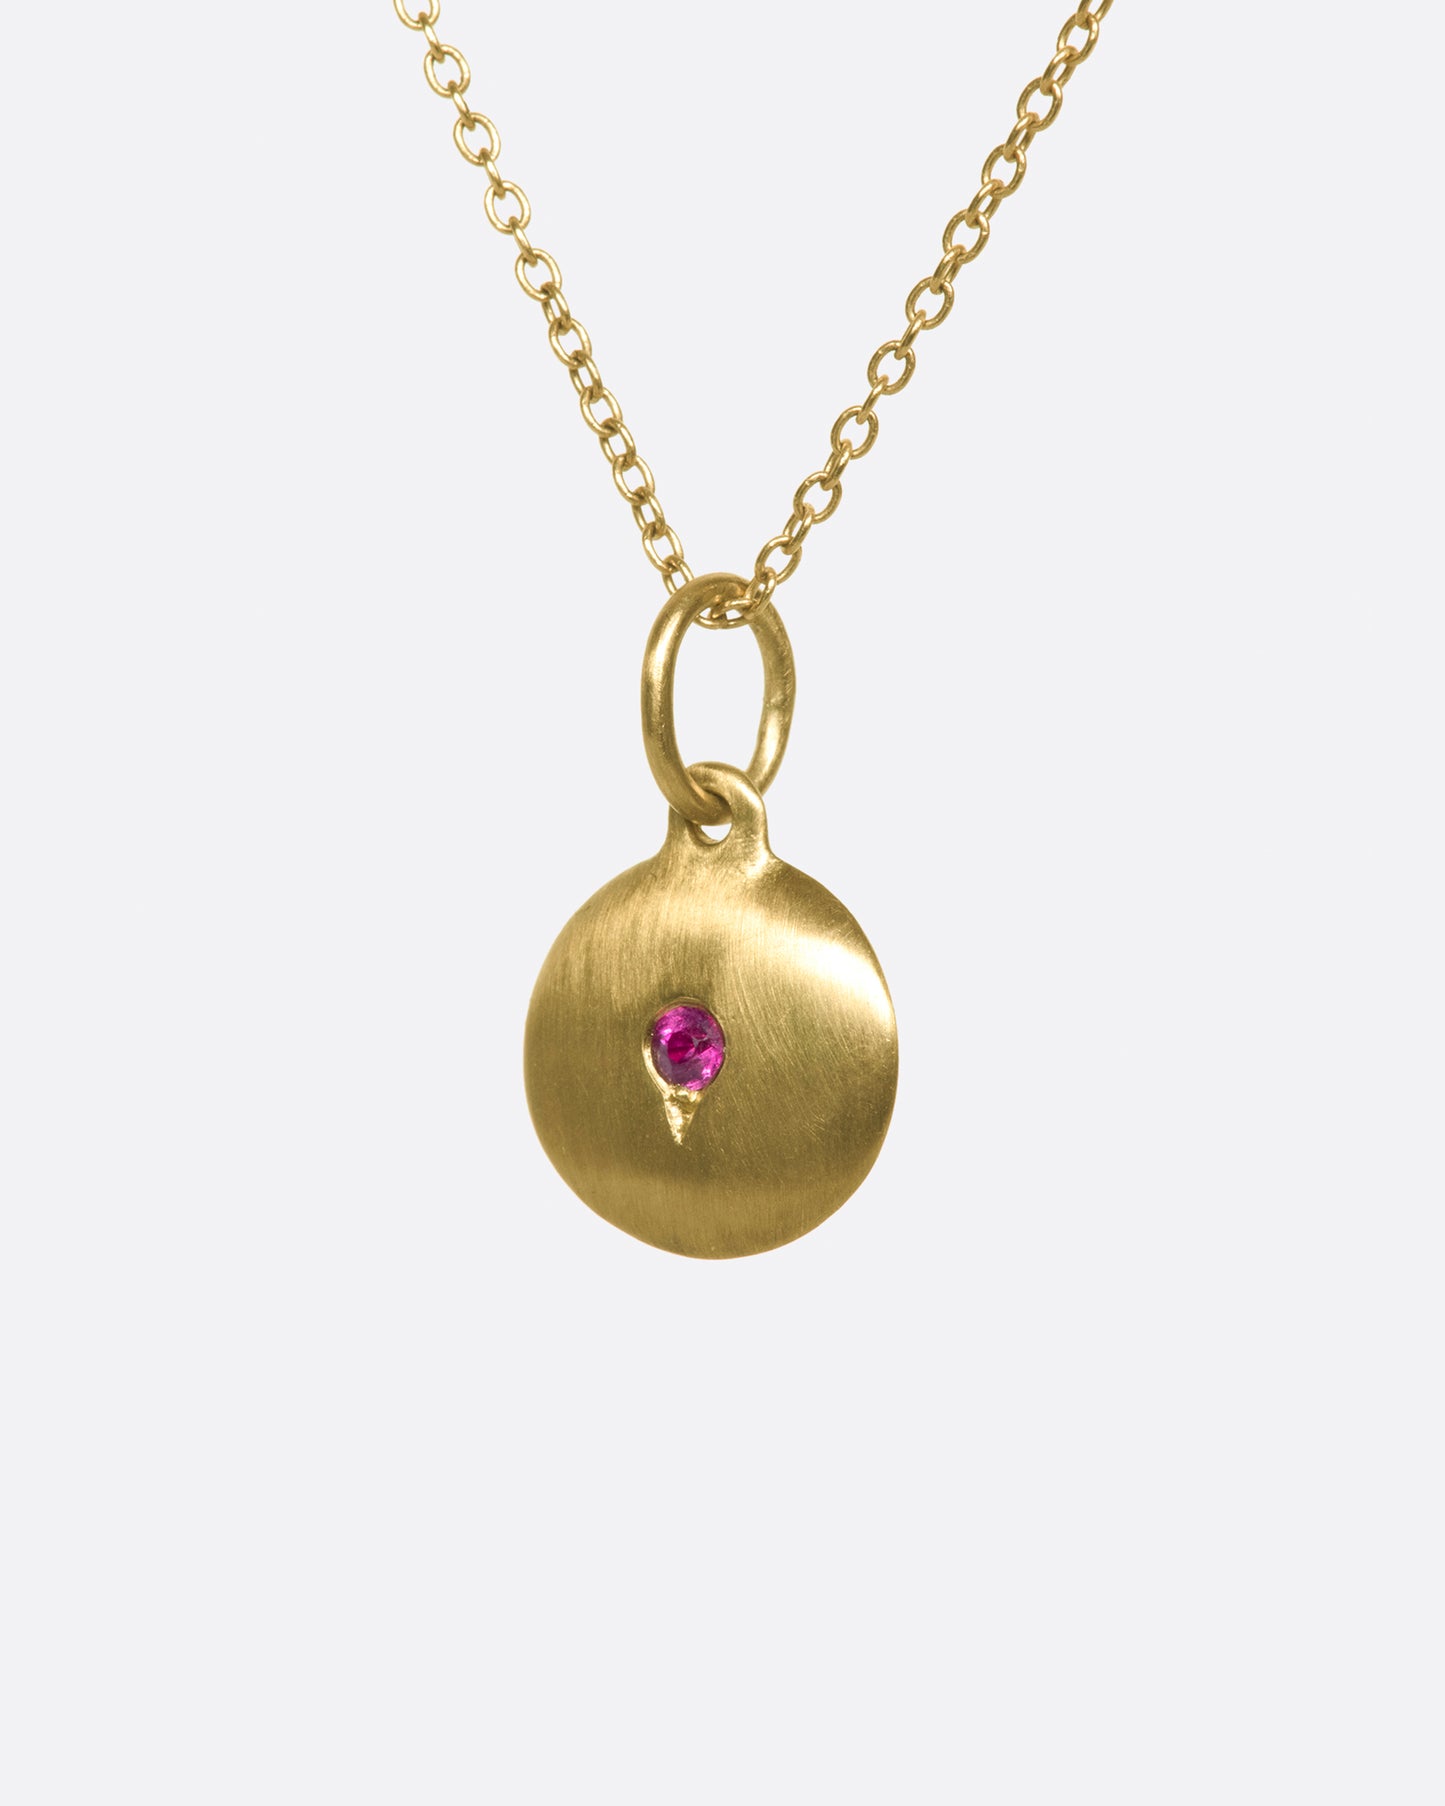 Layer this brushed gold medallion necklace with your favorite pieces; the ruby adds a little pop of color.